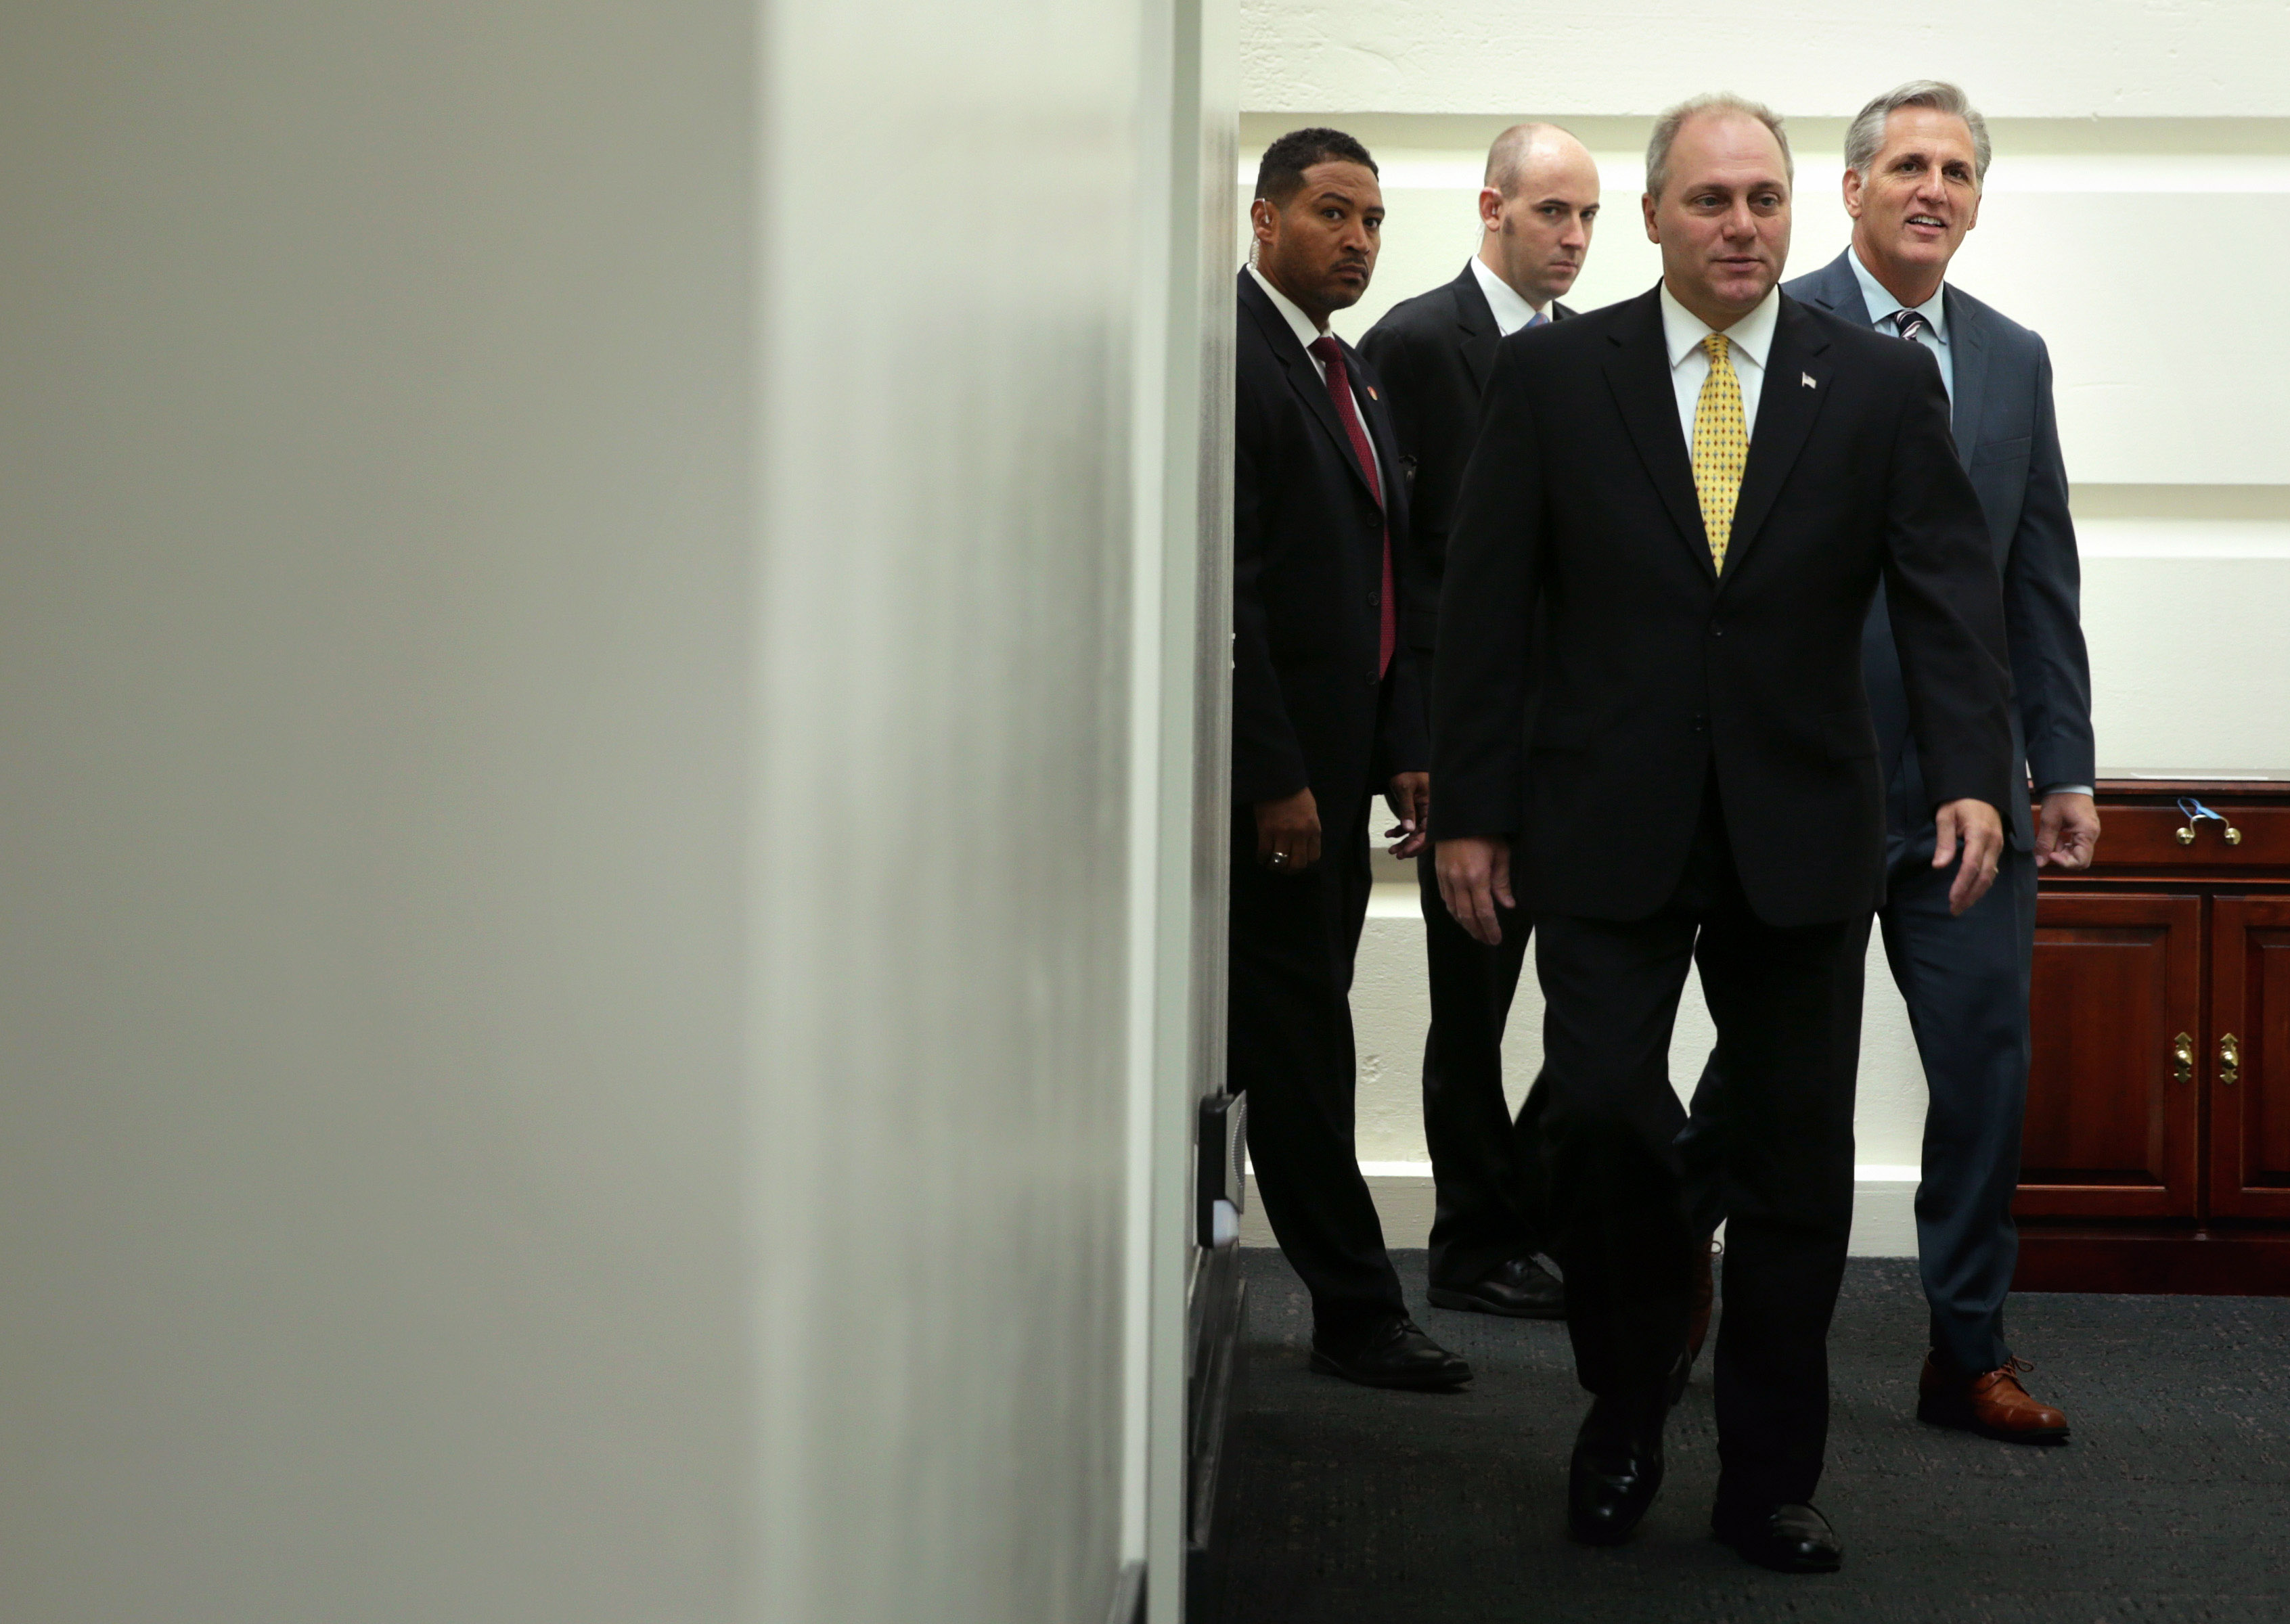 U.S. House Majority Leader Rep. Kevin McCarthy (R-CA) (R) and House Majority Whip Rep. Steve Scalise (R-LA) (2nd R) arrive at a House Republican Conference meeting August 1, 2014 on Capitol Hill in Washington, D.C. (Alex Wong—Getty Images)